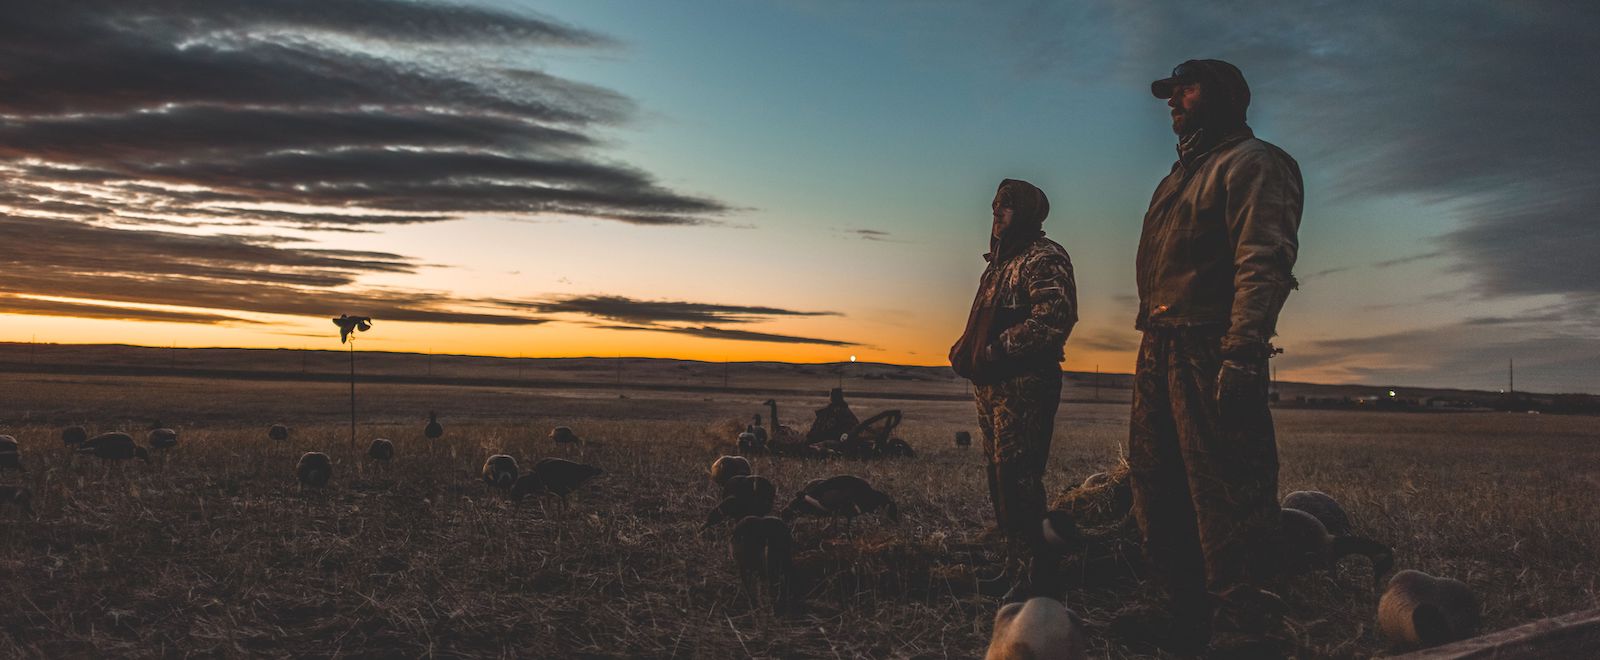 A pair of duck hunters looks across a field at sunrise